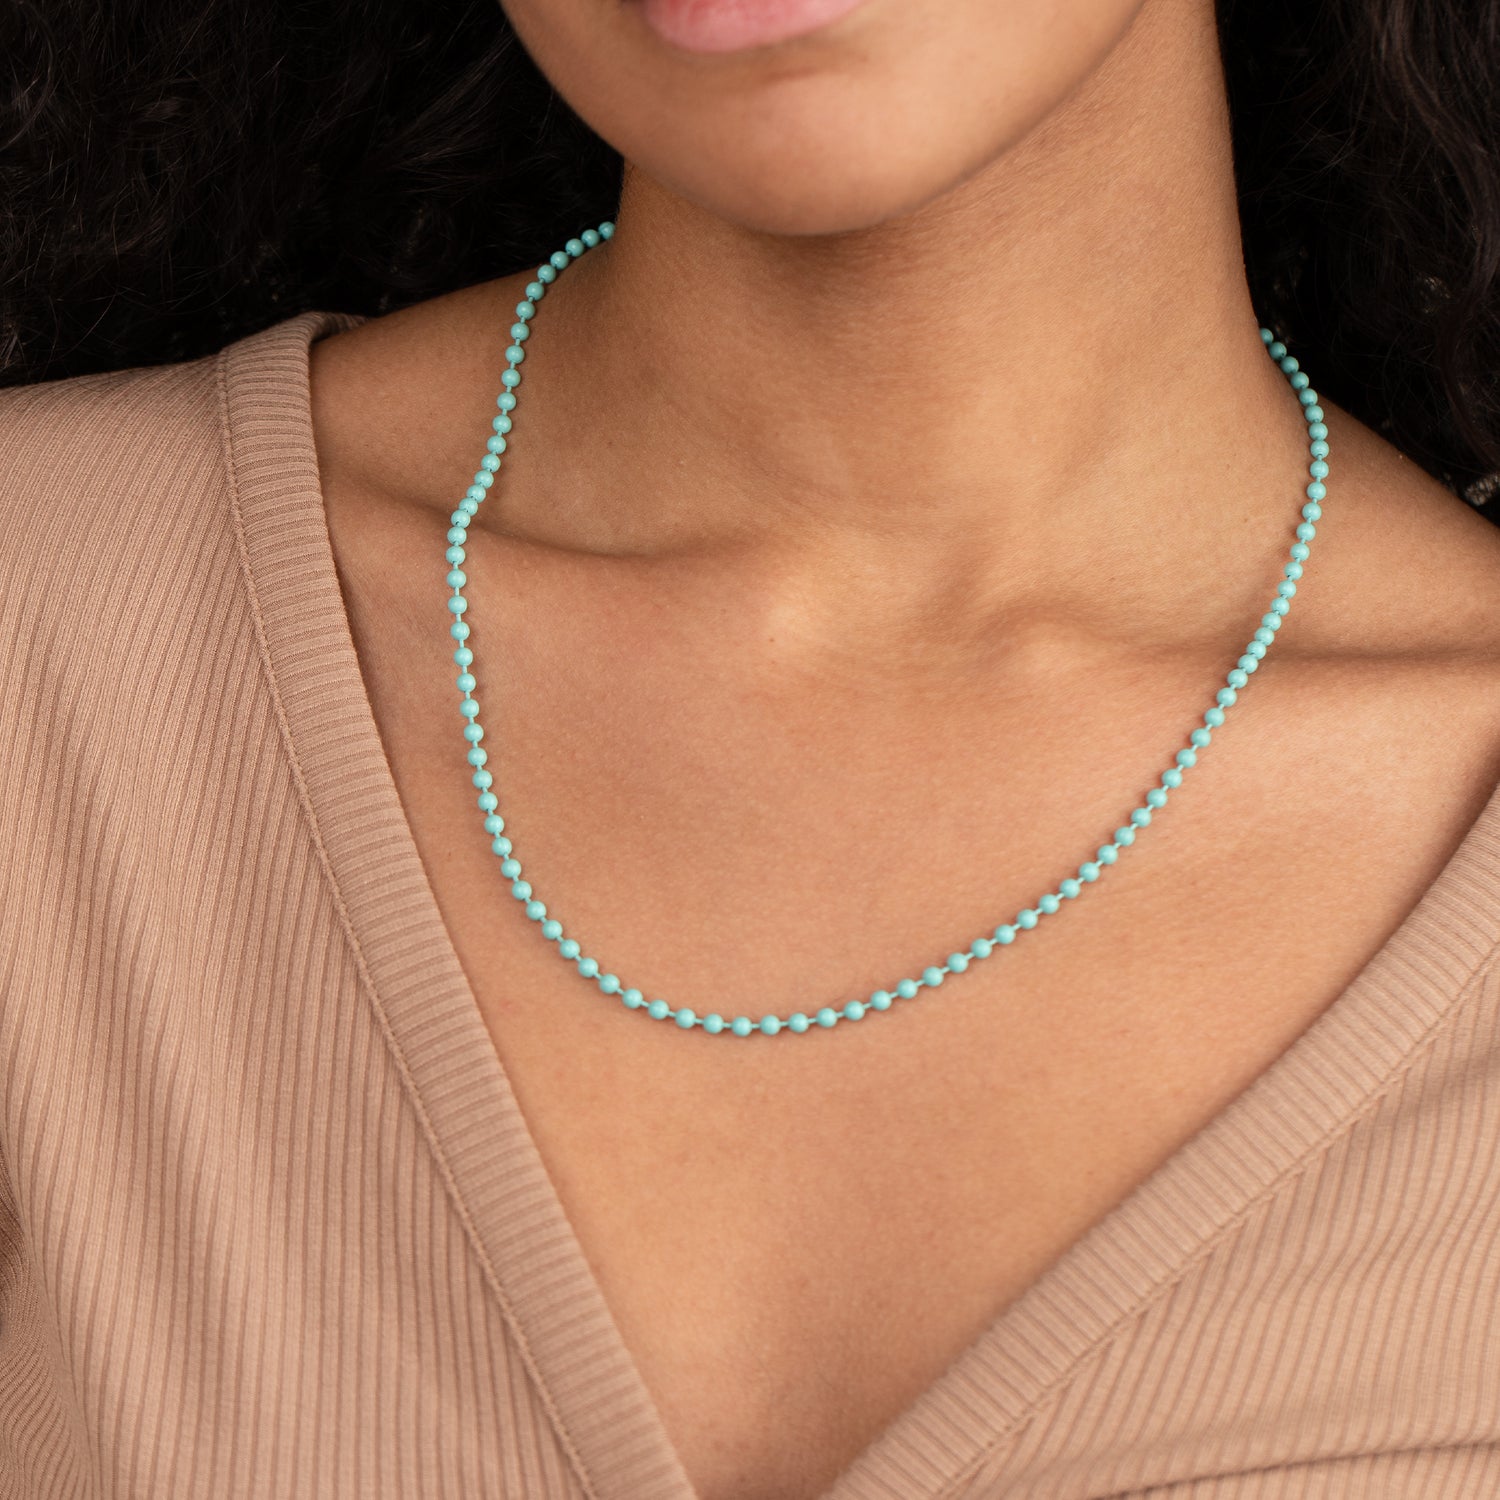 Ball Chain Necklace, Turquoise